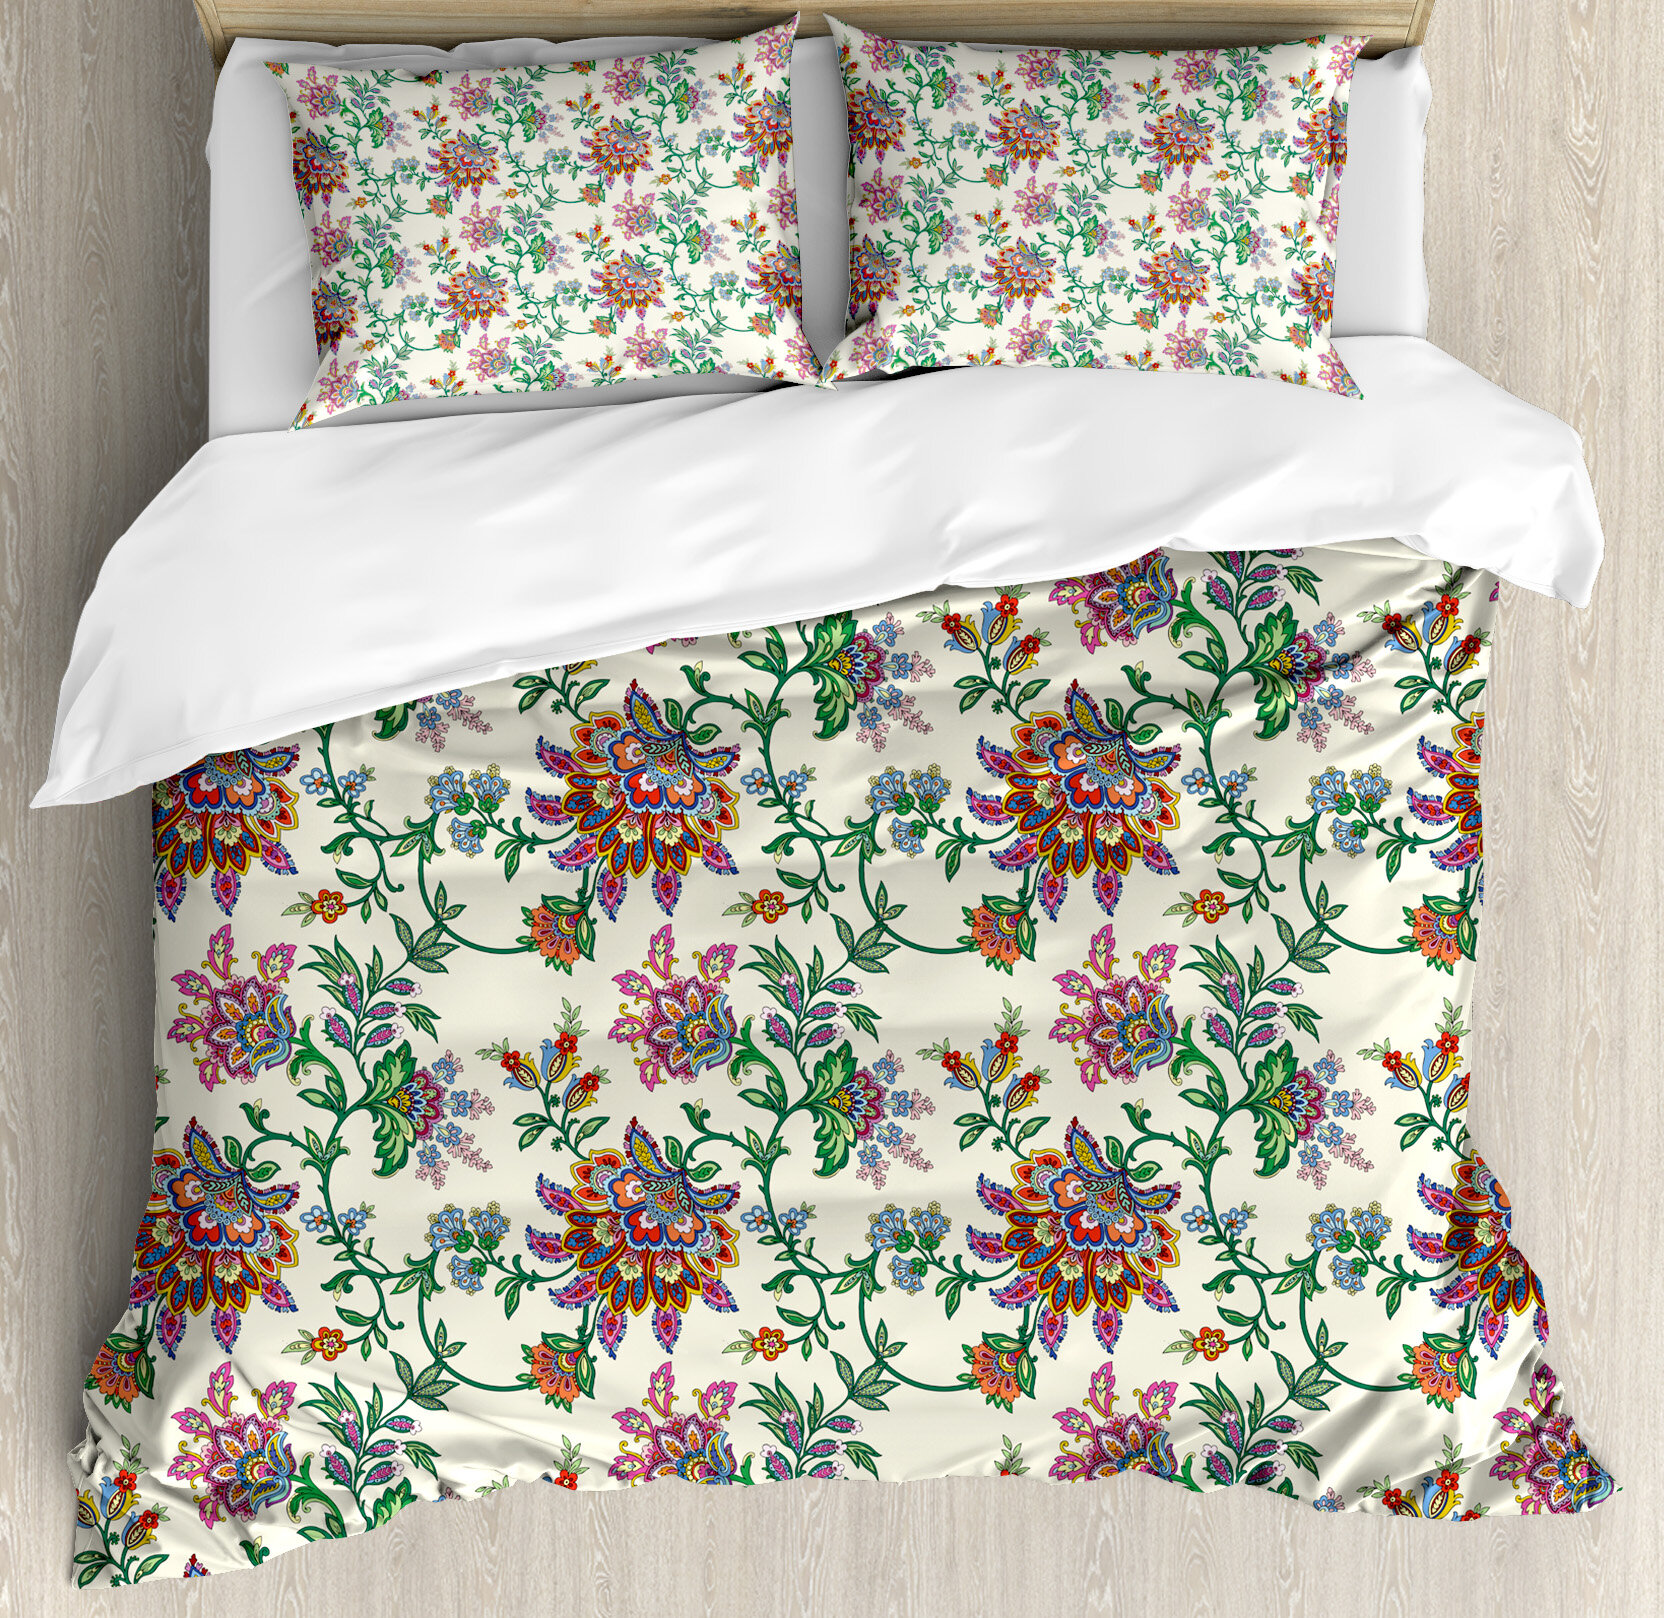 Ambesonne Bohemian Retro Colorful Indian Flowers Duvet Cover Set